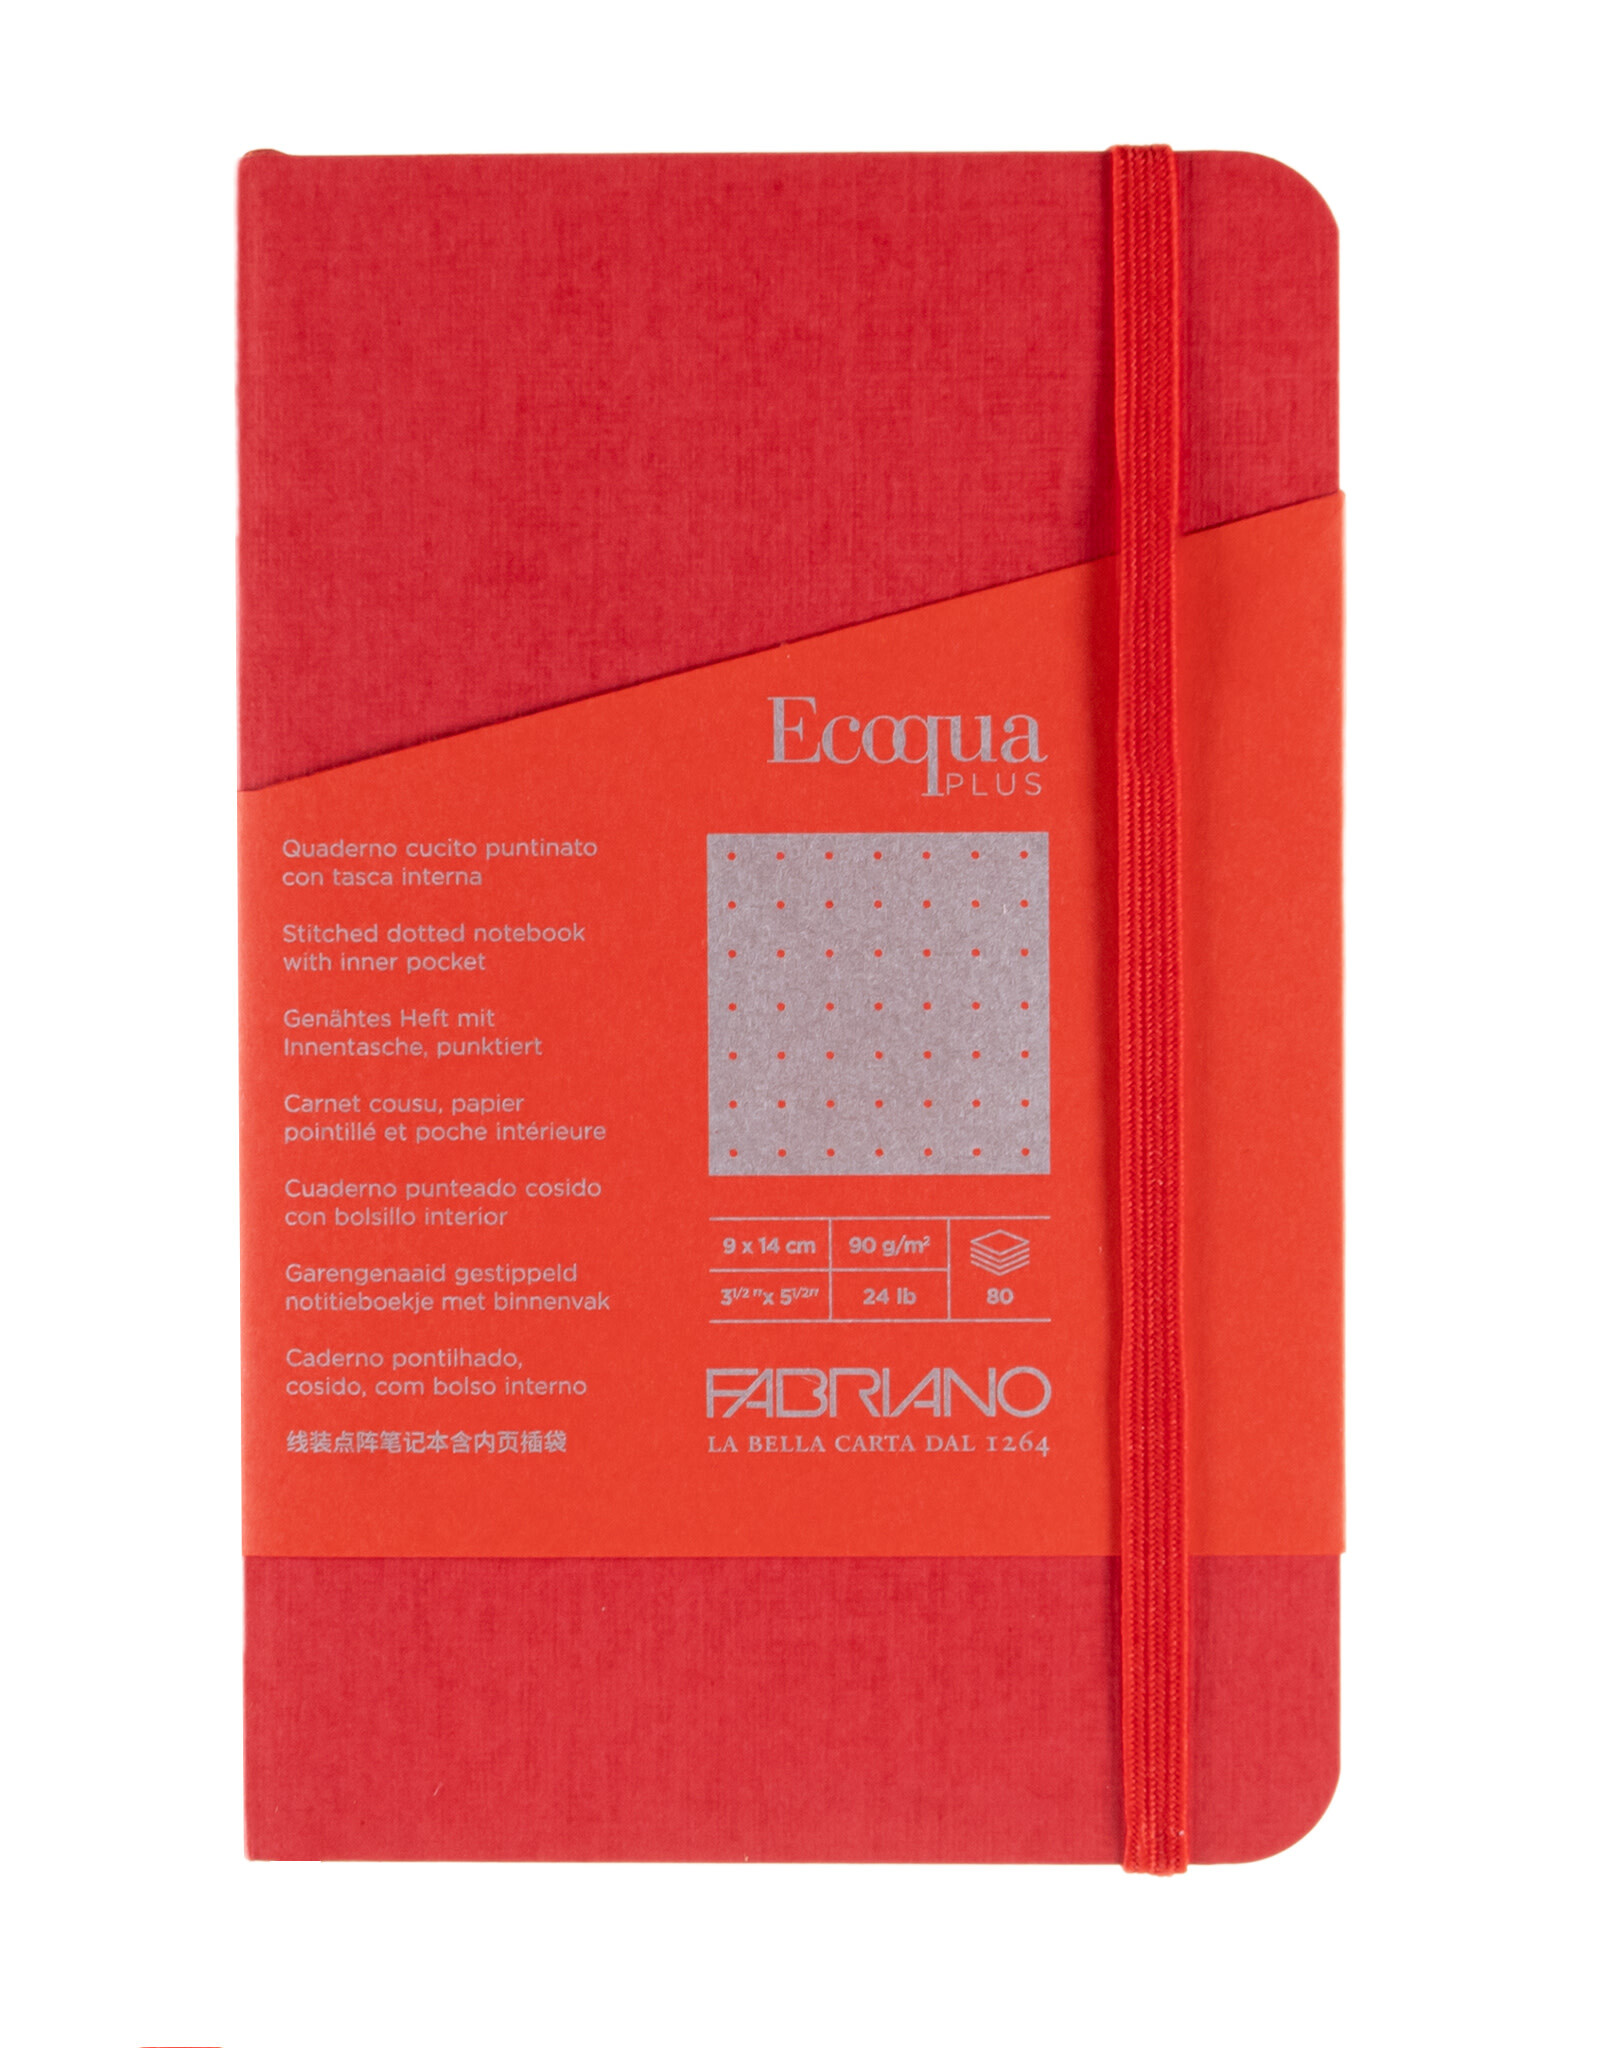 Ecoqua Plus Sewn Spine Notebook, Red, 3.5” x 5.5”, Dotted